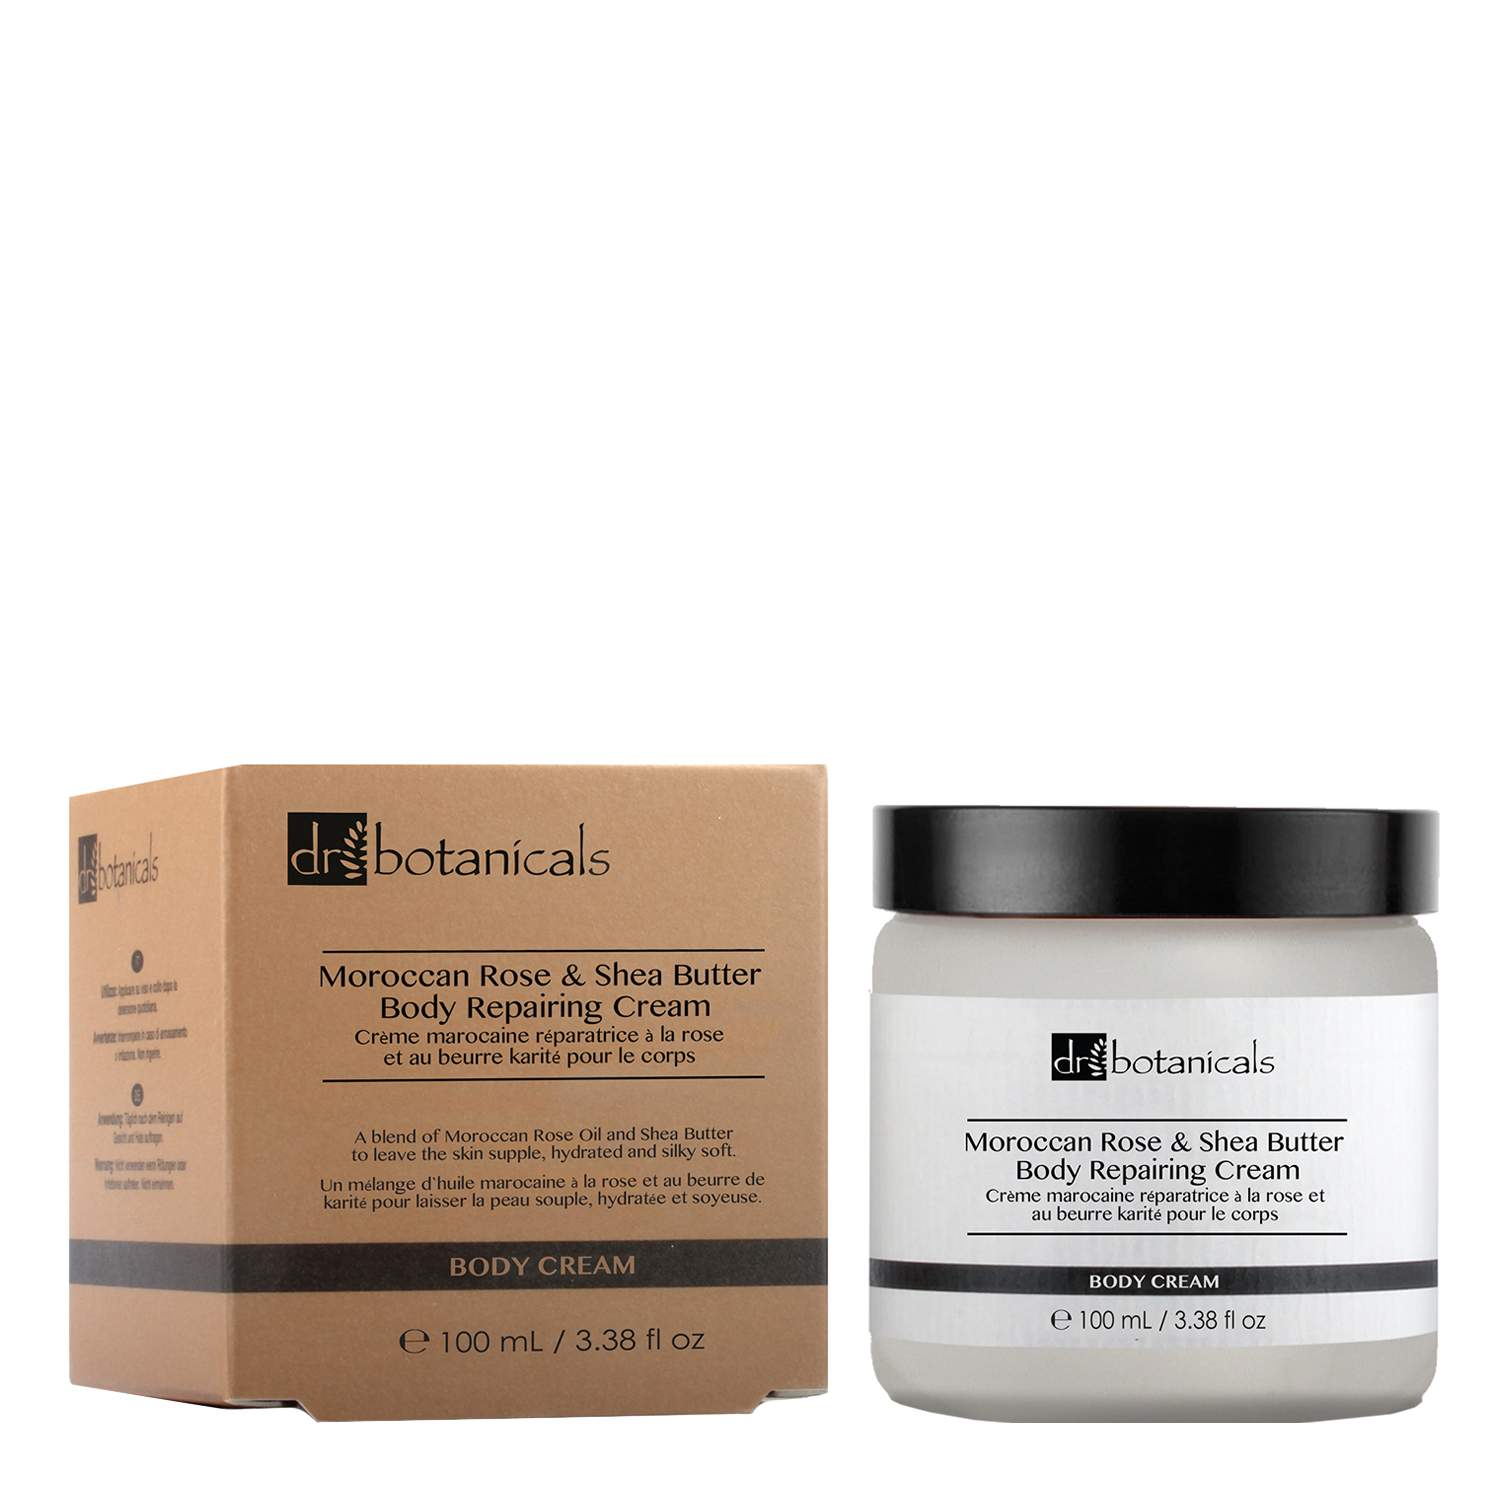 Dr.Botanicals Moroccan Rose & Shea Butter Body Repairing Cream Dr.Botanicals Moroccan Rose & Shea Butter Body Repairing Cream 1